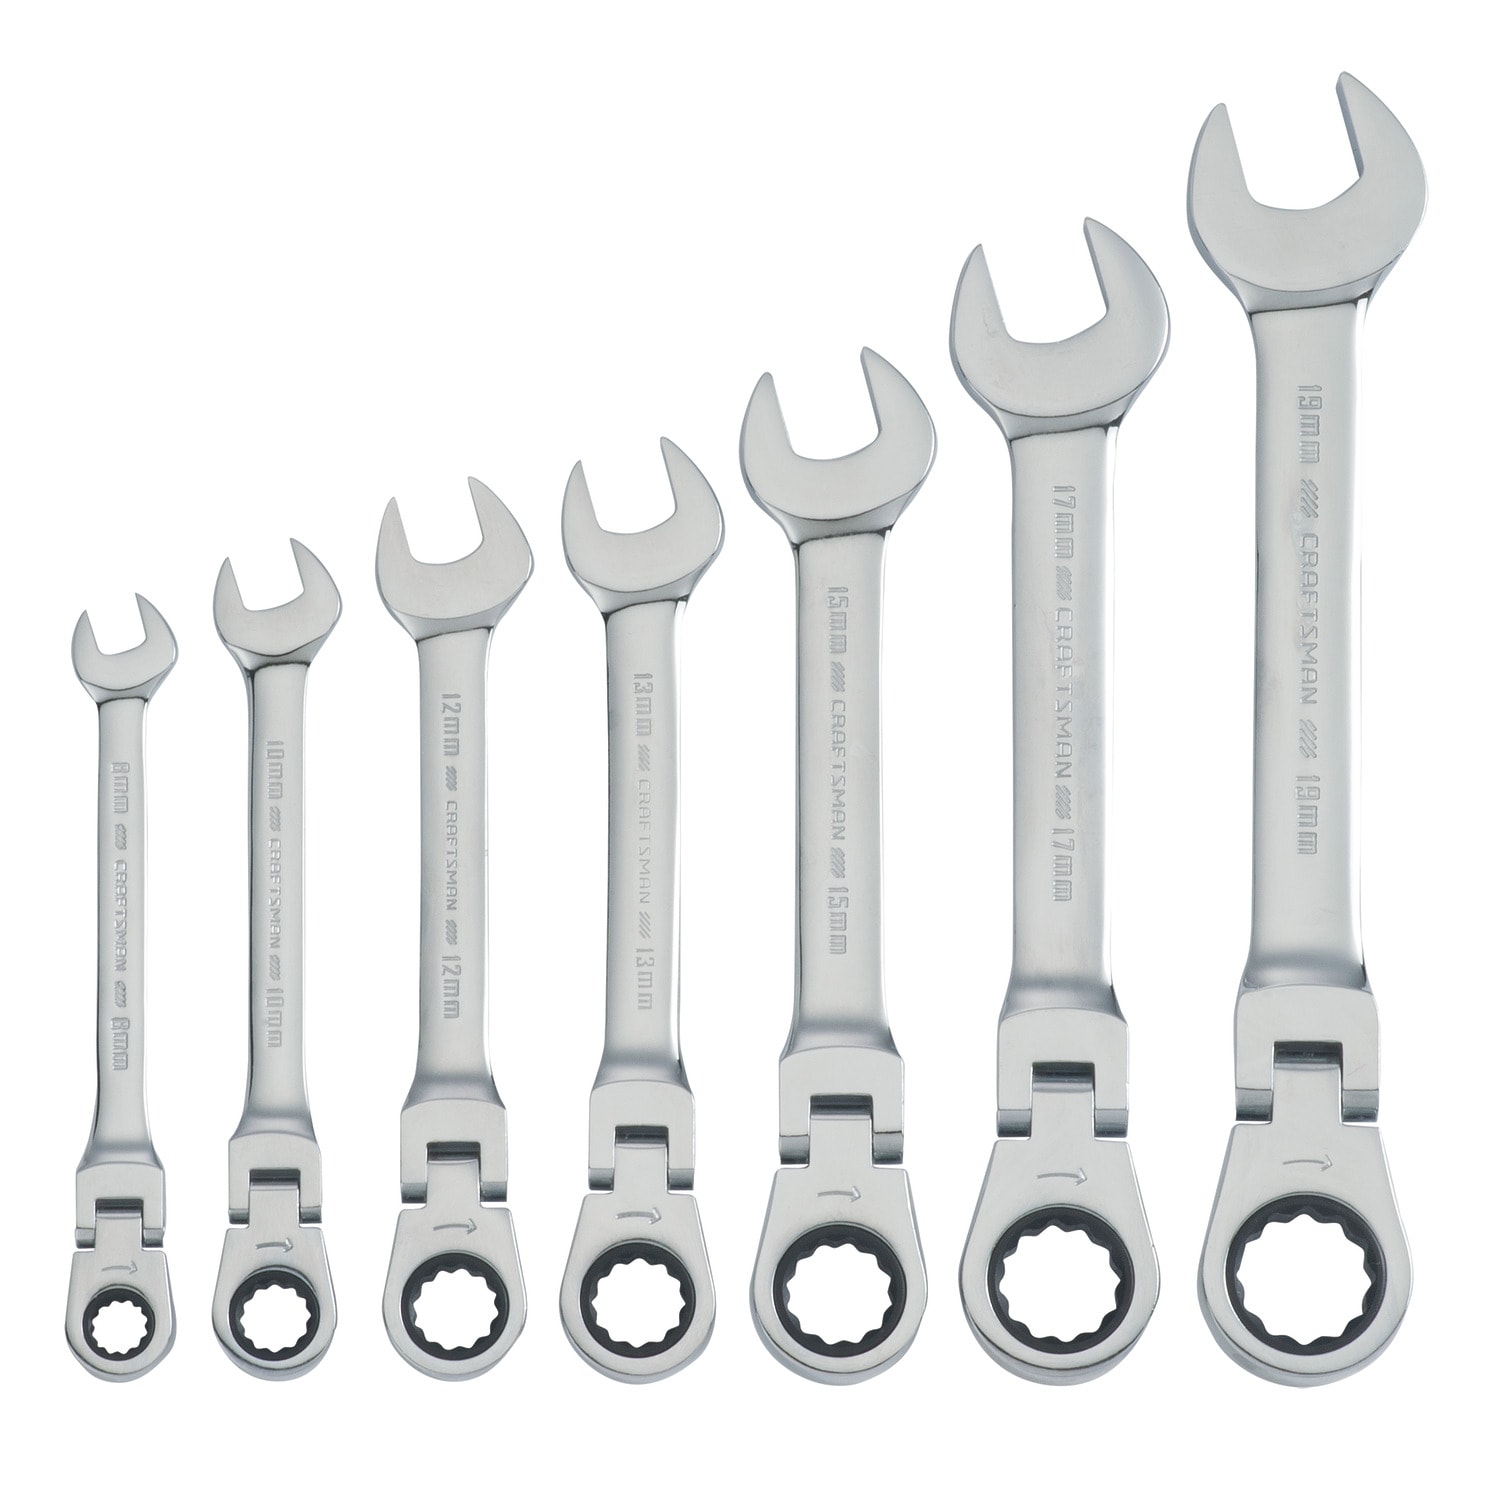 Spanner Tool Flexible Pivoting Head Ratchet Wrench Spanner Garage Metric hand Tool 6mm-19mm For auto and Home Repair Universal Wrench Color : 15mm